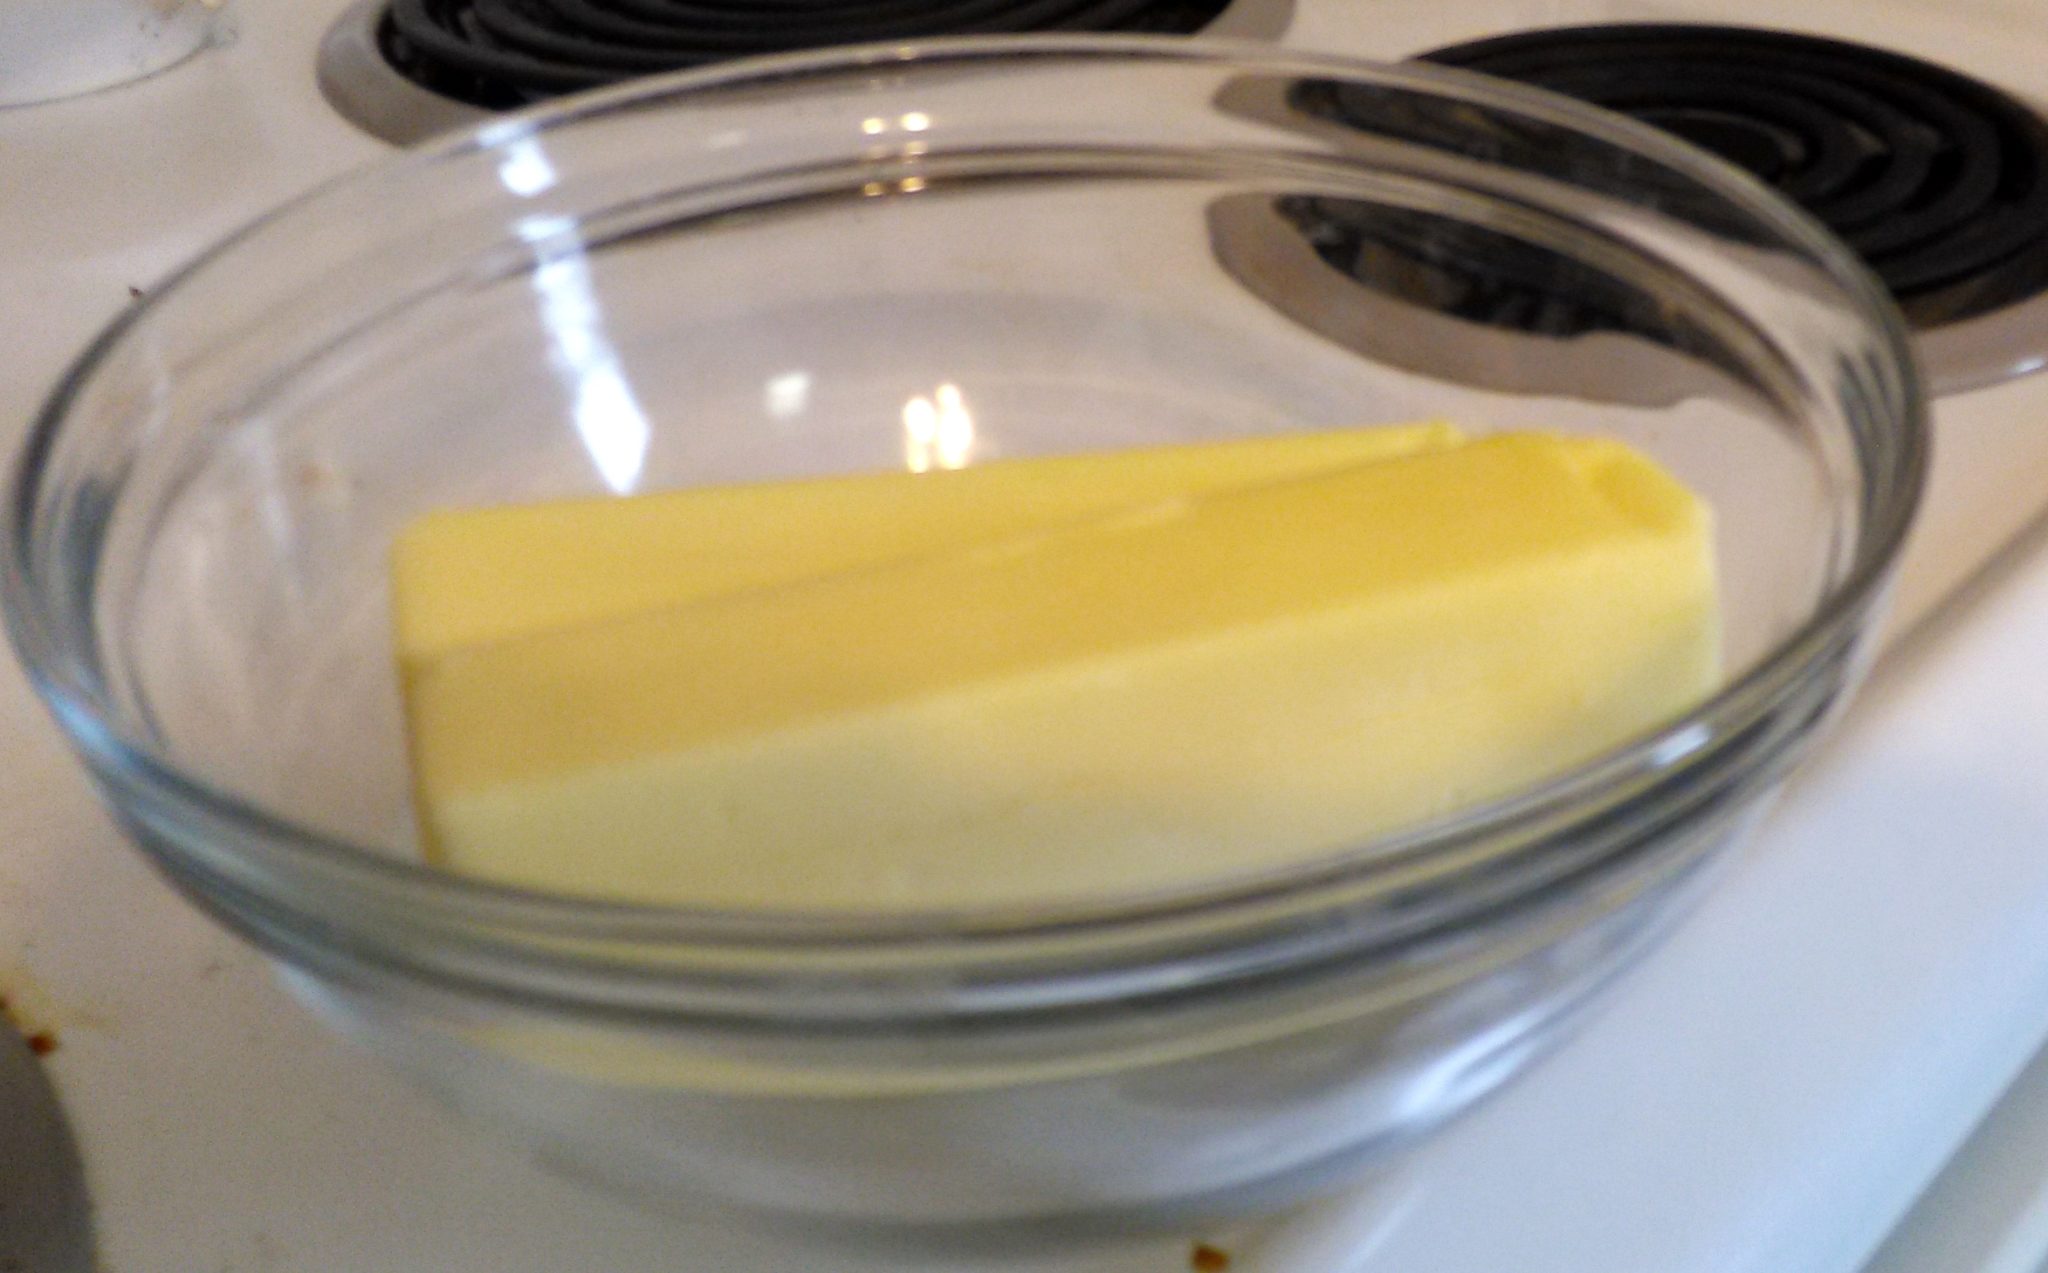 Tip: I put both sticks of butter straight from the refrigerator in a glass bowl. I placed the bowl on top of the stove so the heat from the oven below would slightly warm it to room temperature. 